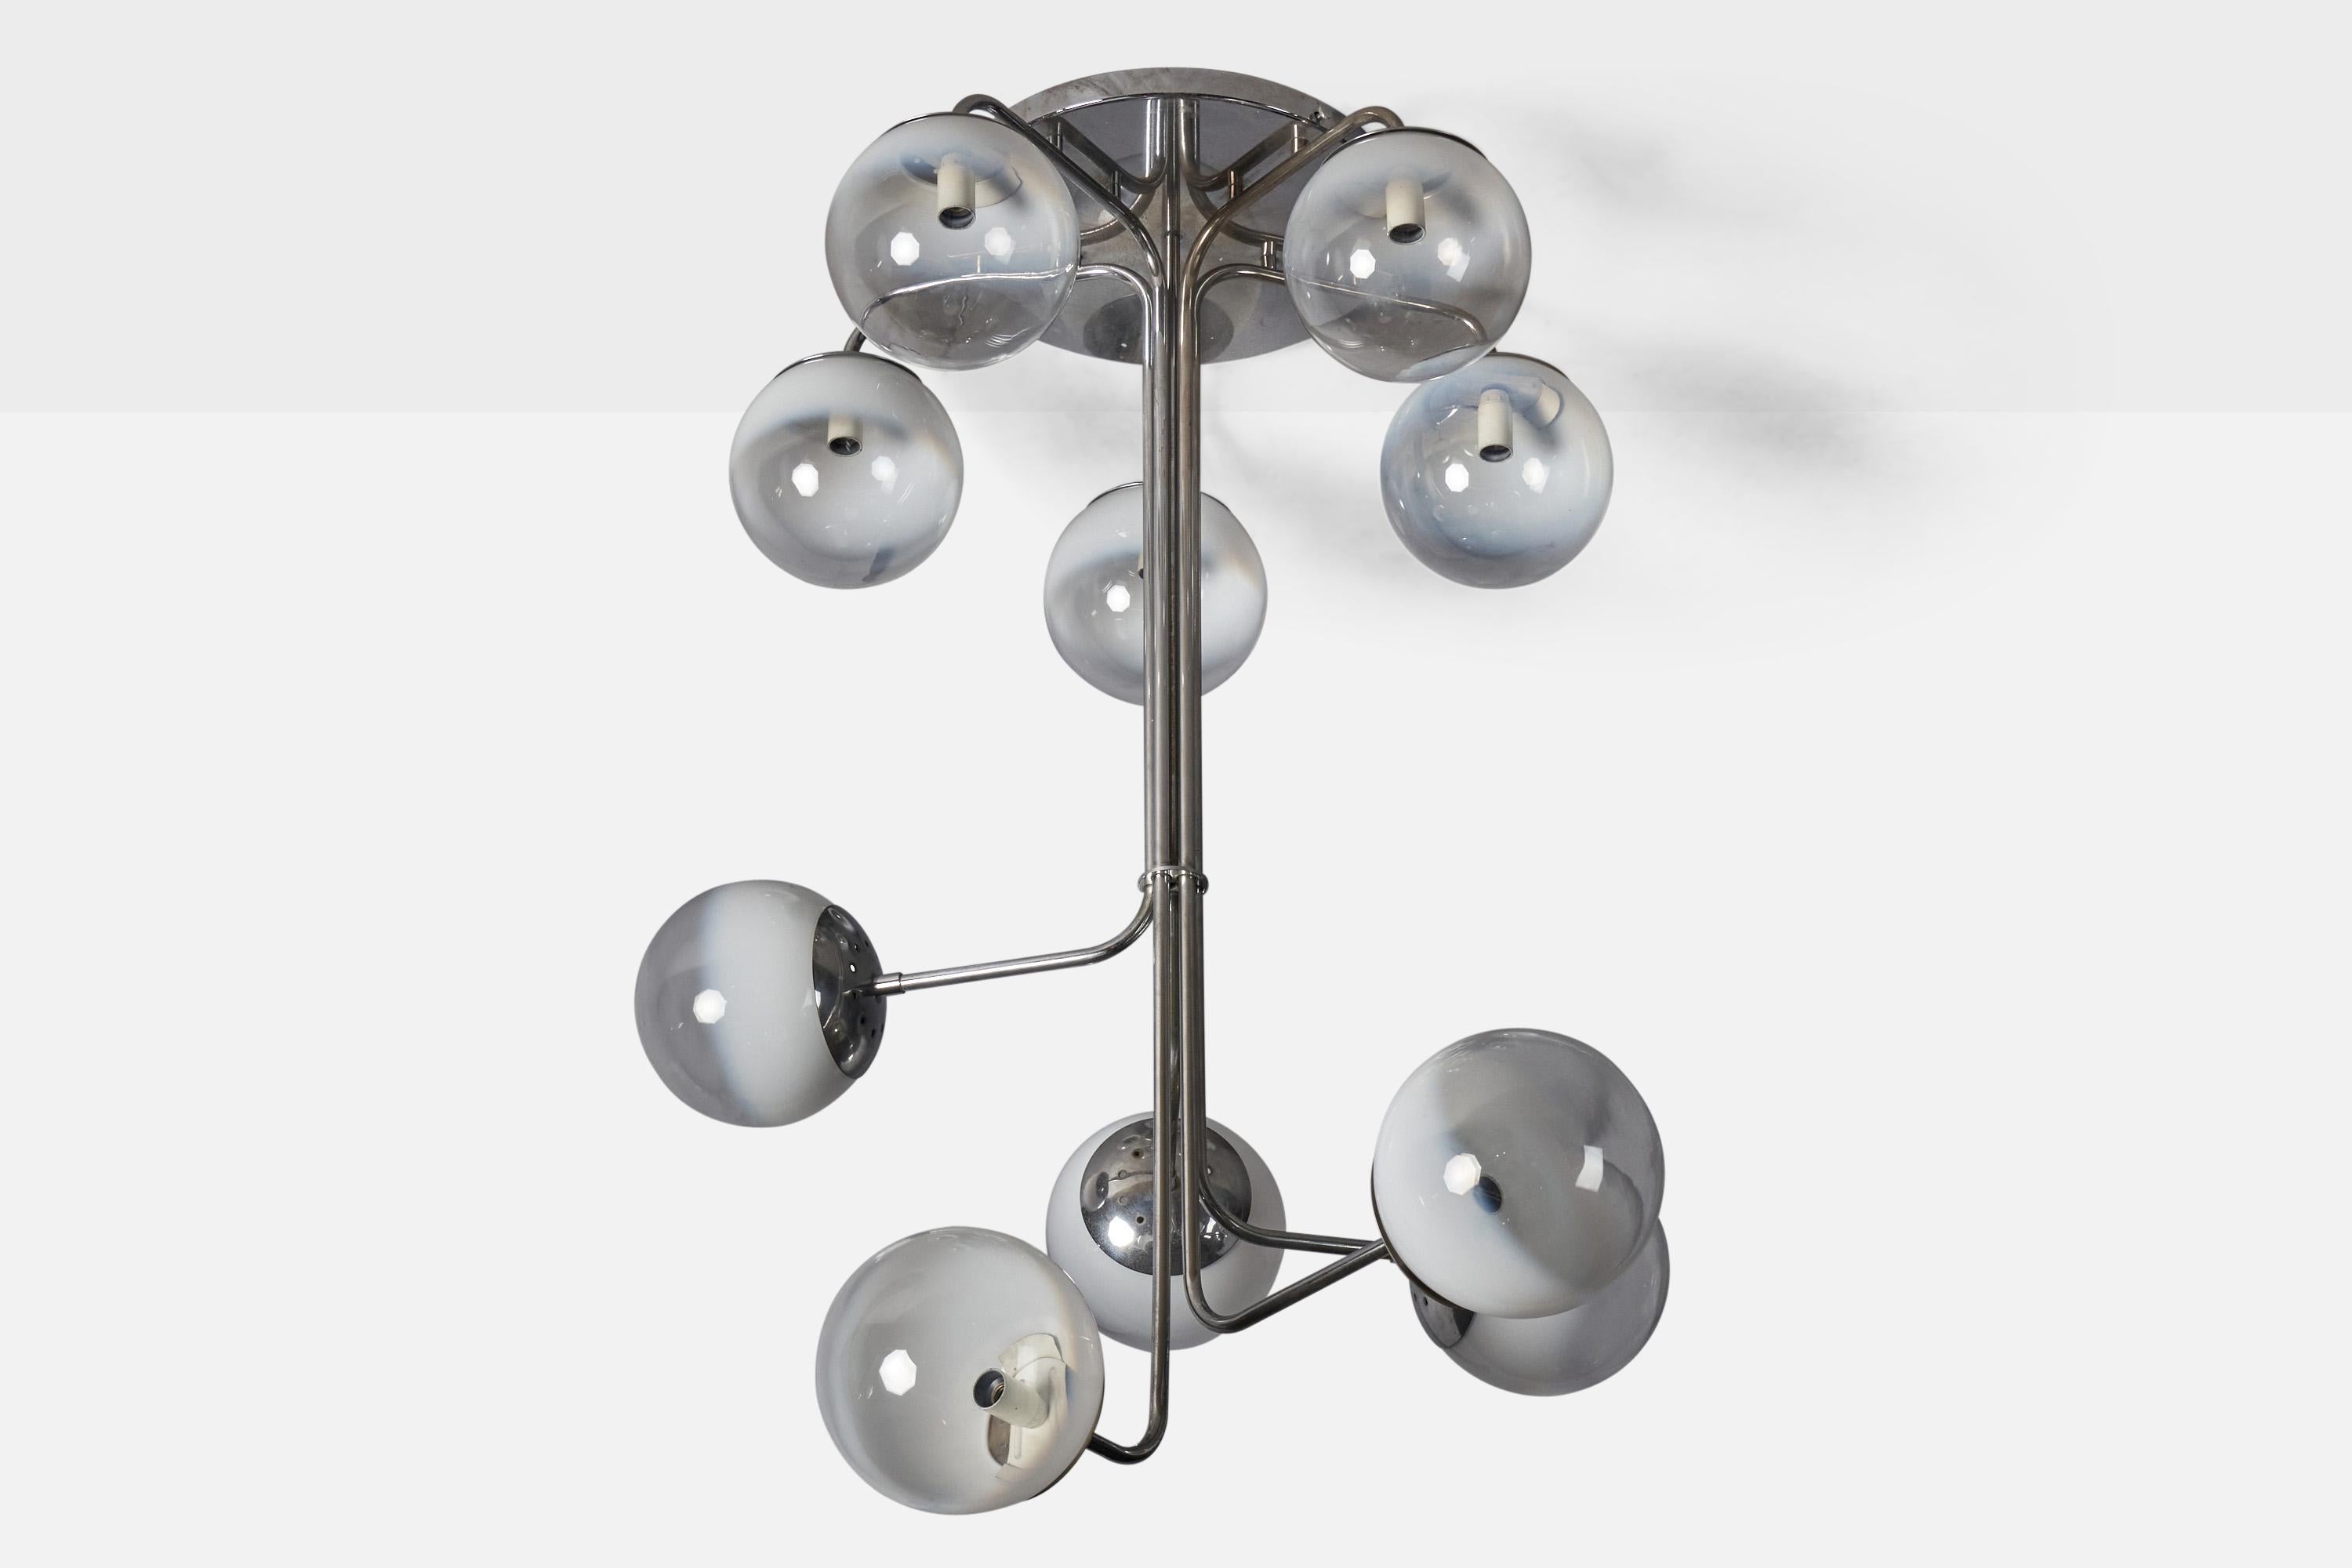 A semi-frosted glass and chrome-plated metal chandelier, designed by Angelo Mangiarotti and produced by Candle, Italy, 1970s.

Overall Dimensions (inches): 43.5